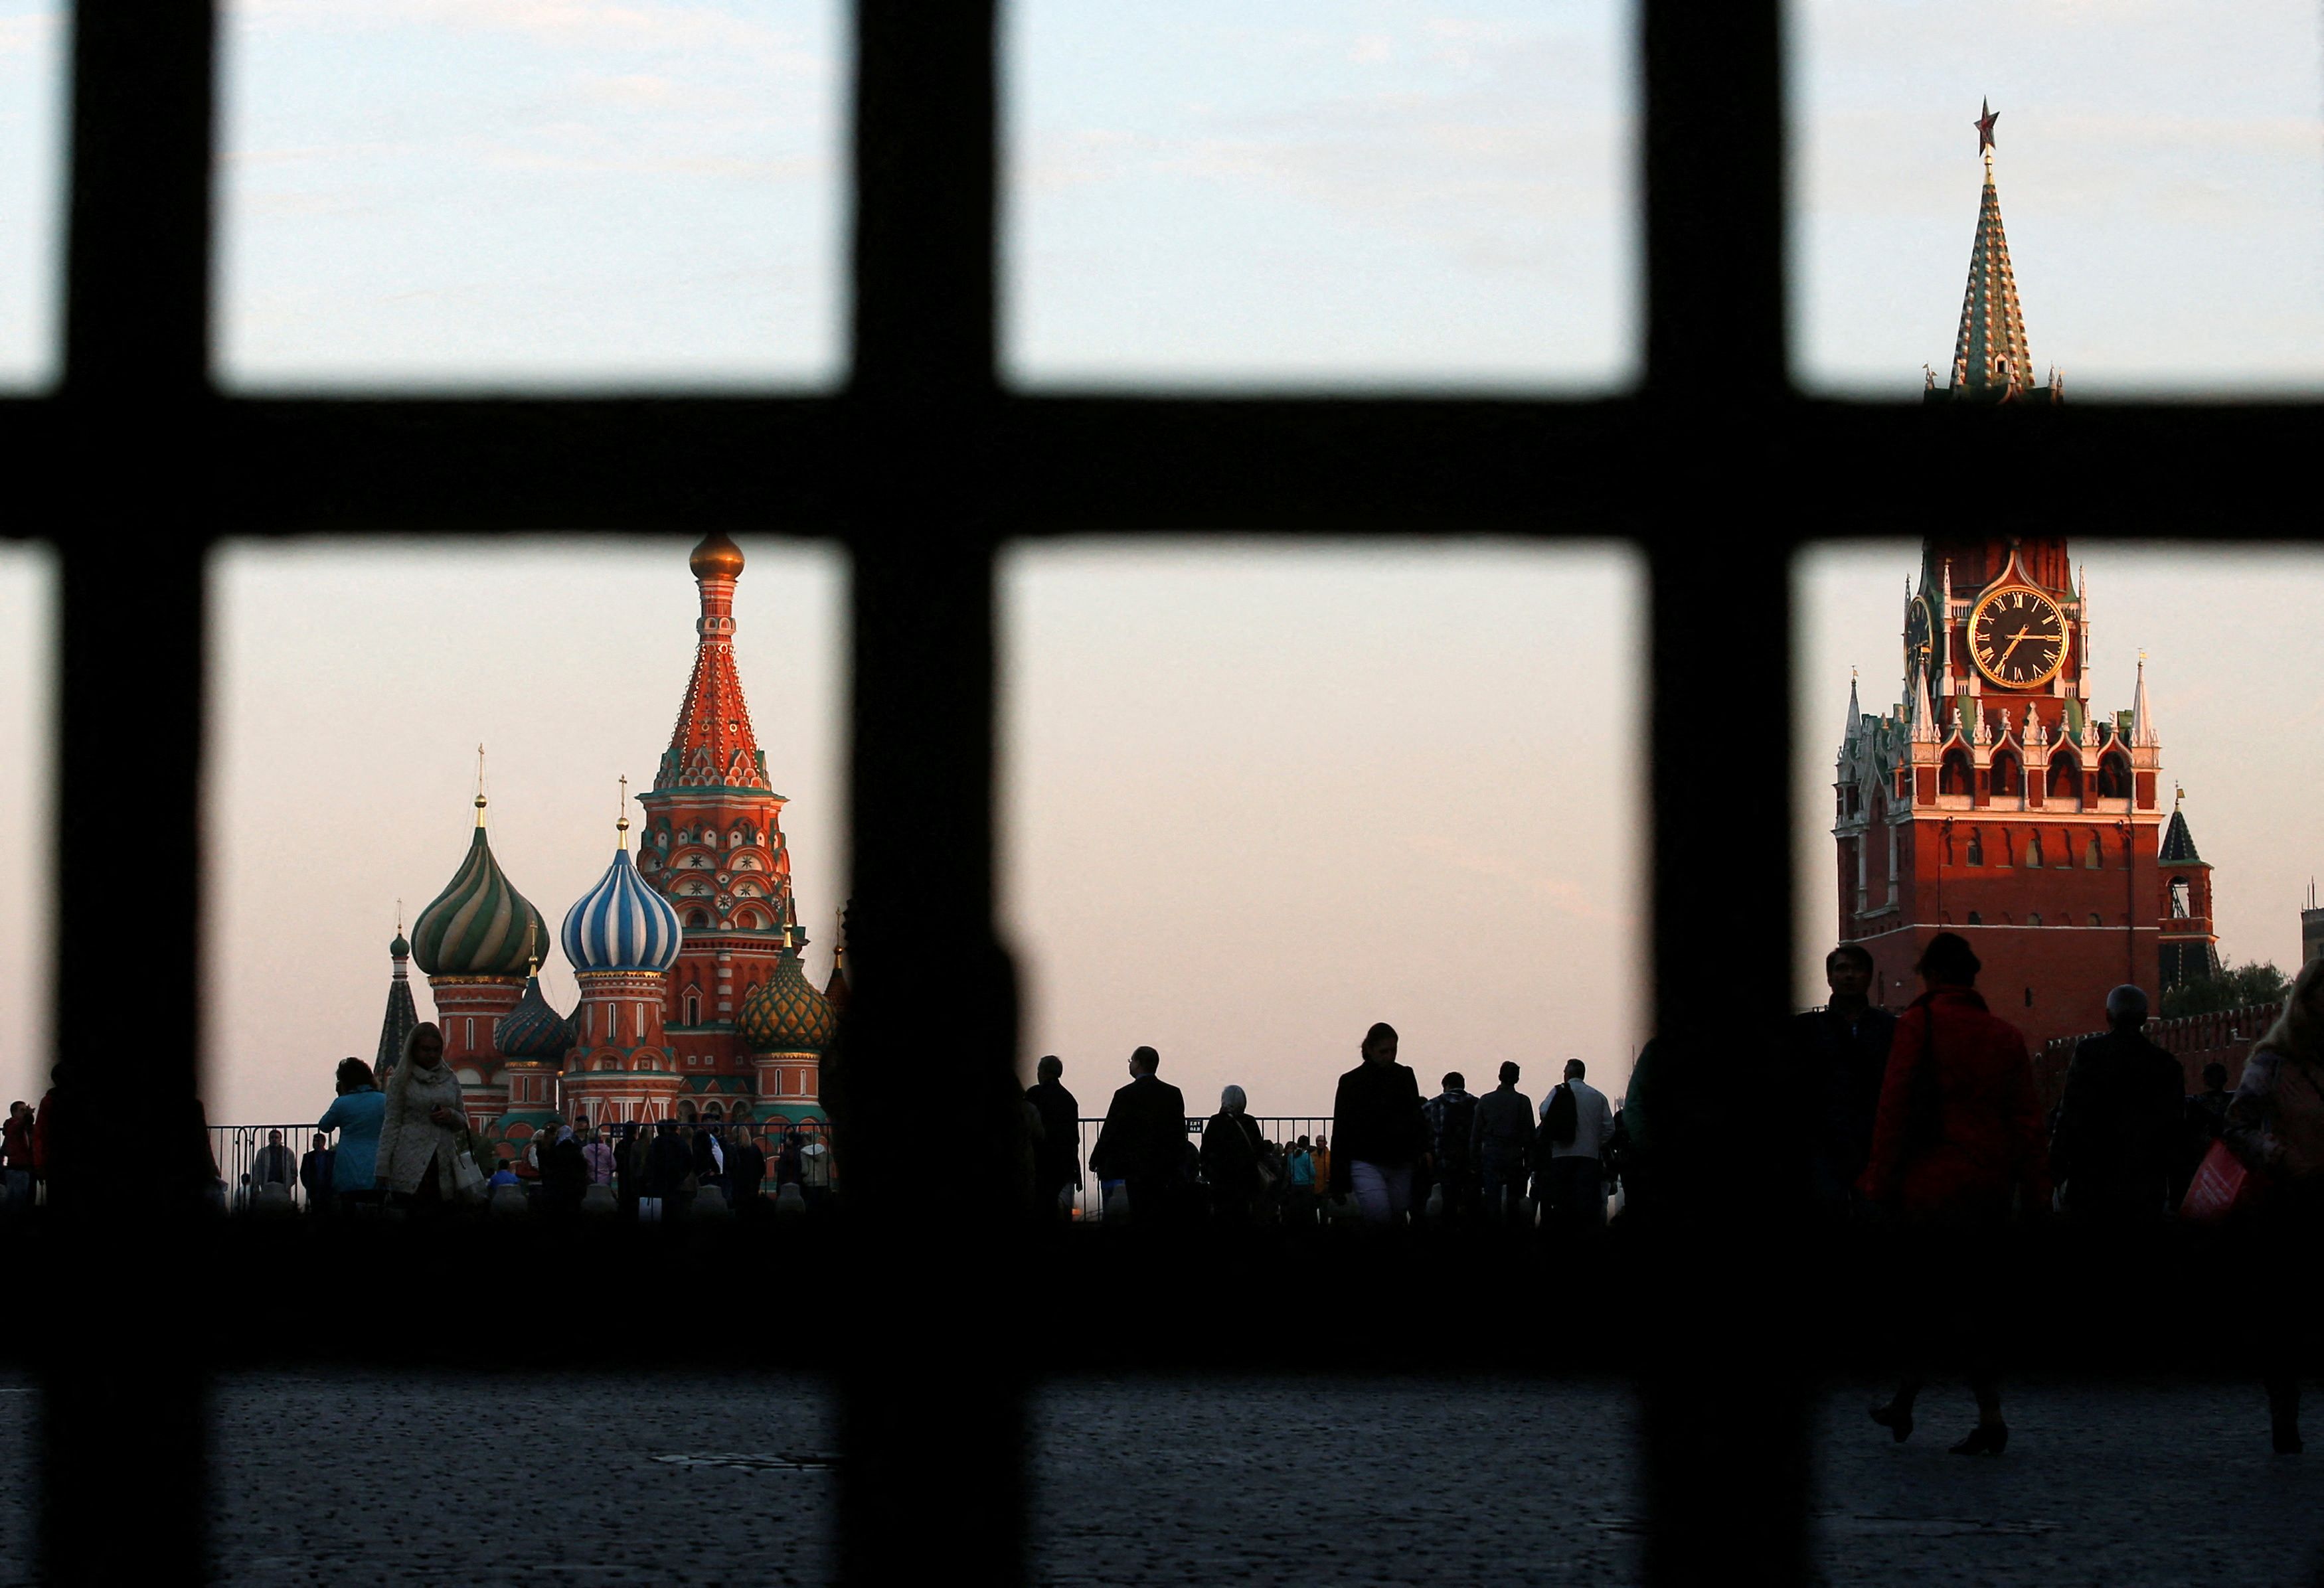 Red Square, St. Basil's Cathedral and the Spasskaya Tower of the Kremlin are seen through a gate in central Moscow